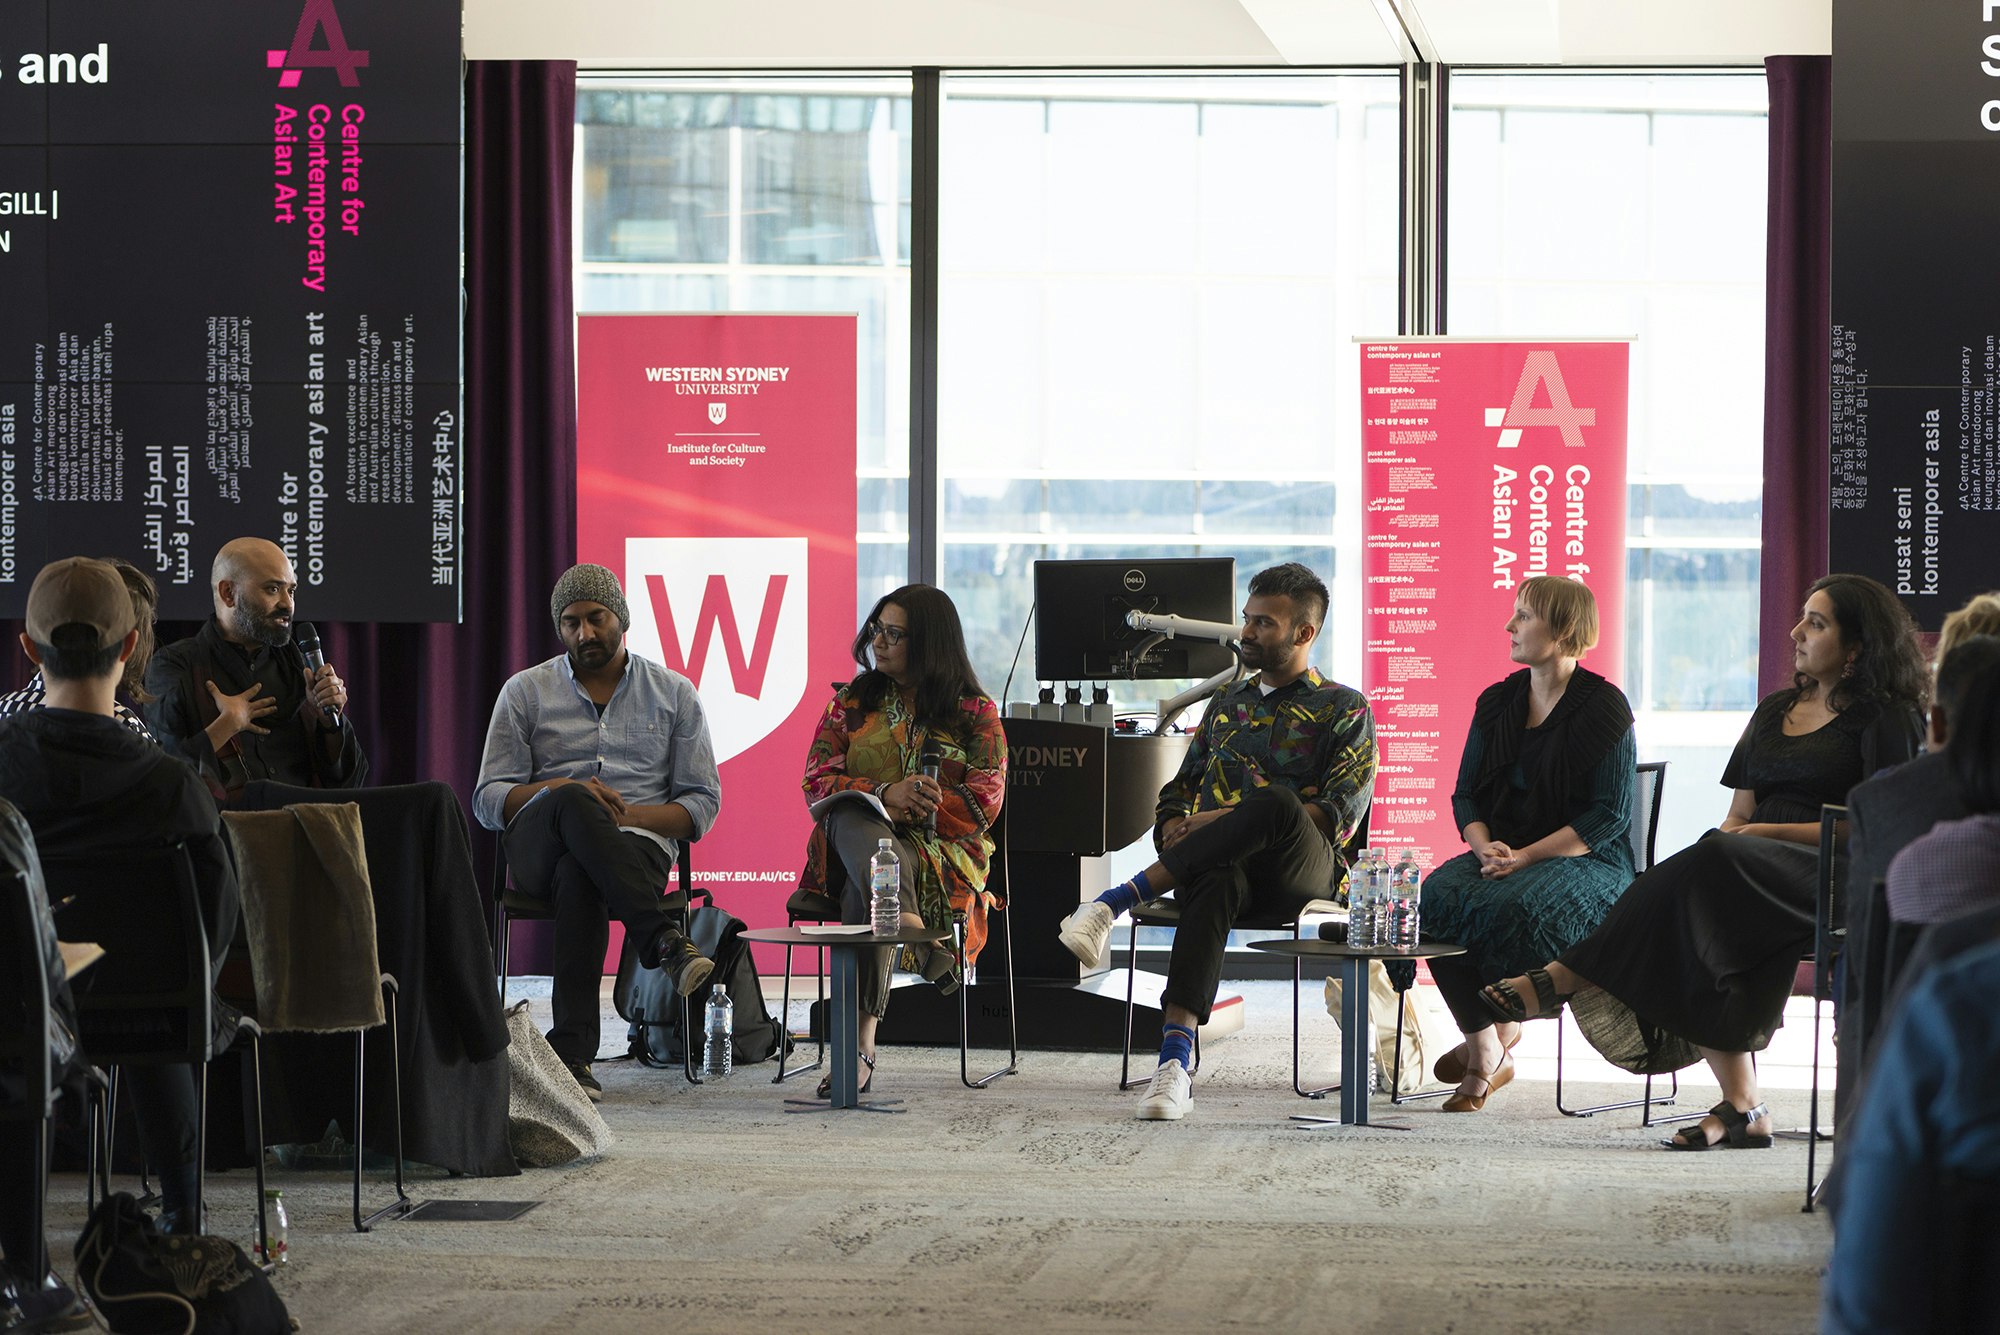 From left to right: Dr Sunil Badami, S. Shakthidharan, Dr Mehreen Faruqi, Gary Paramanathan, Melanie Eastburn and Amrit Gill. When South is North: Contemporary Art and Culture in South Asia and Australia symposium, 16 August 2017, Western Sydney University, Parramatta campus. Produced by 4A Centre for Contemporary Asian Art in association with the Institute for Contemporary Culture and Society, Western Sydney University. Photo: Kai Wasikowski.